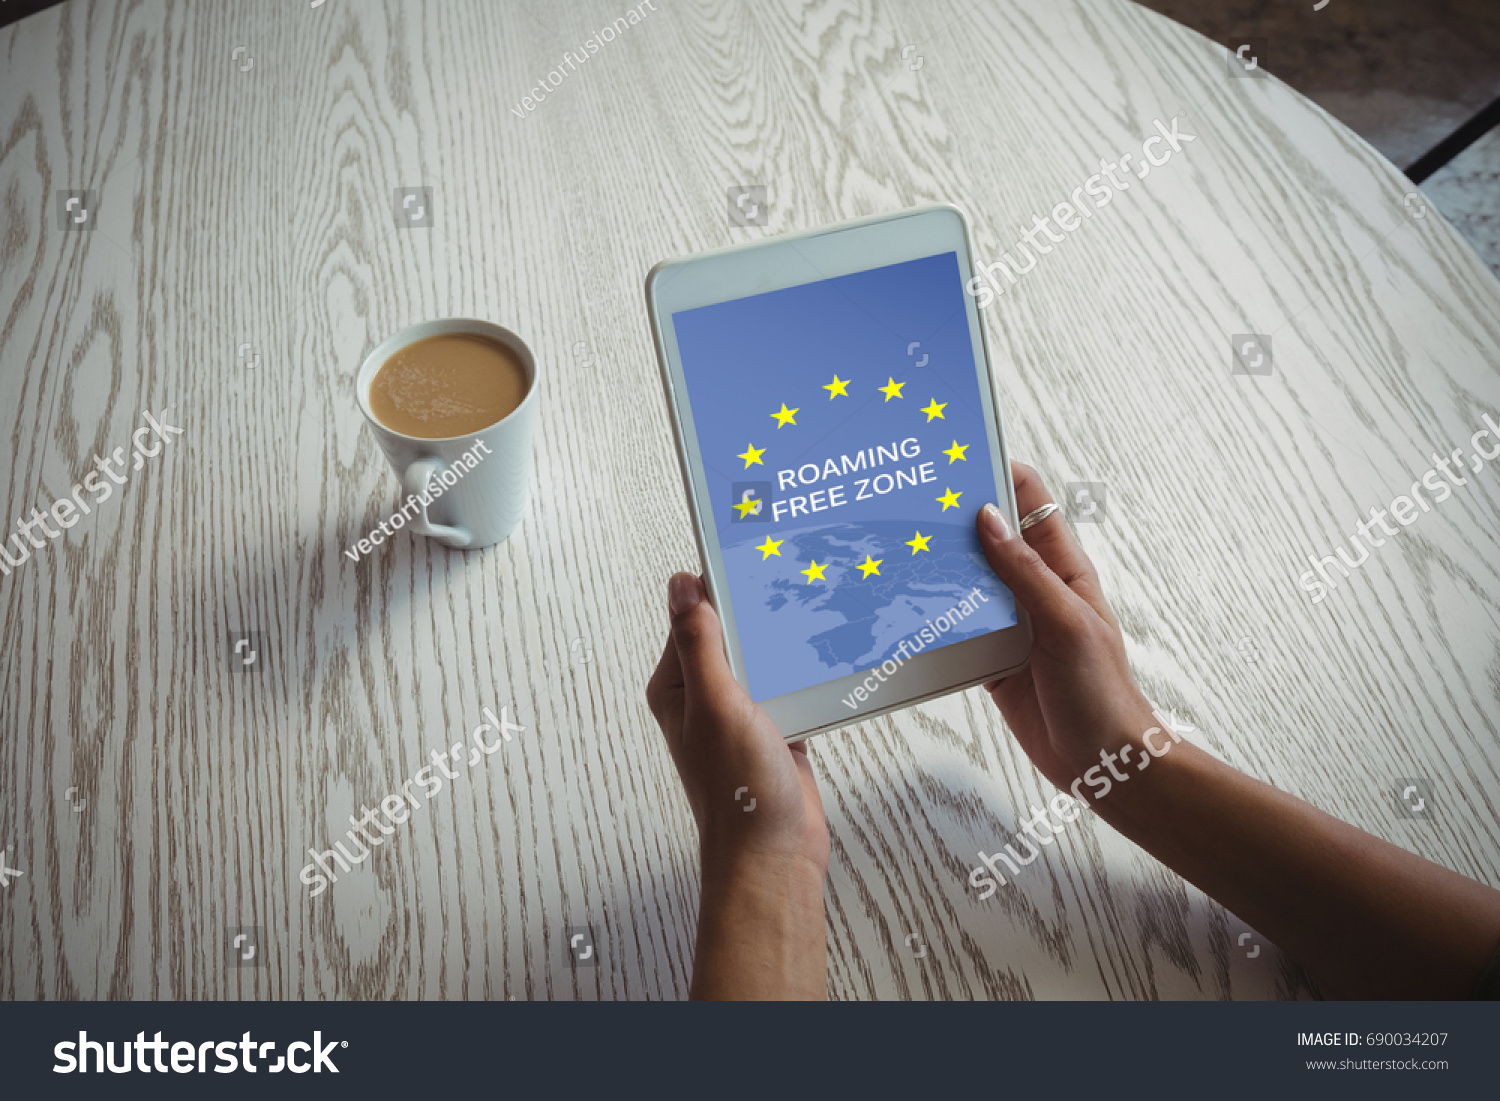 Roaming free zone text on European Union flag against cropped image of woman holding tablet #690034207